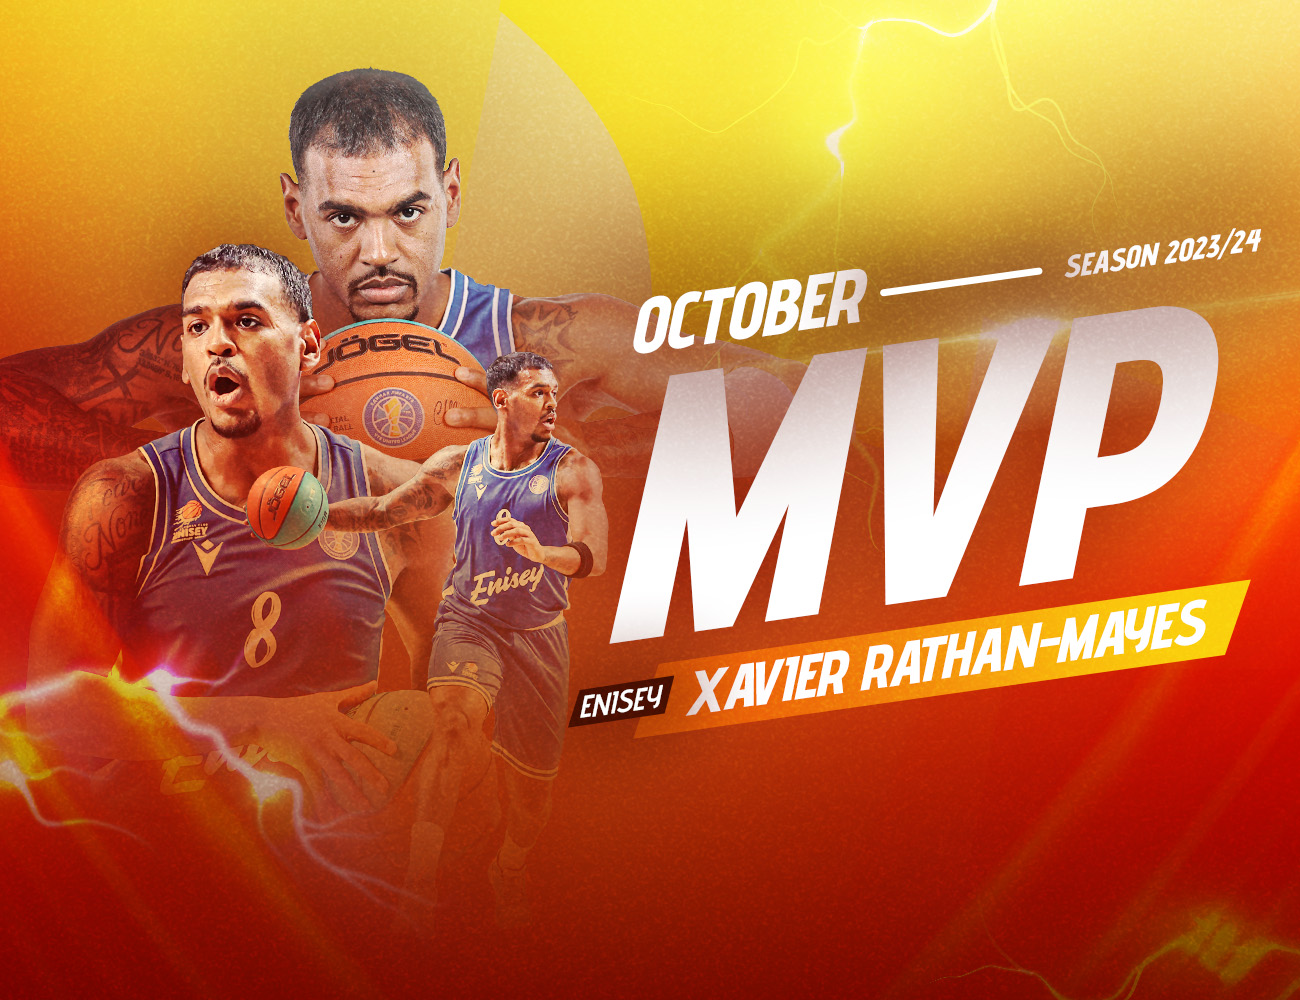 Xavier Rathan-Mayes is the MVP of October